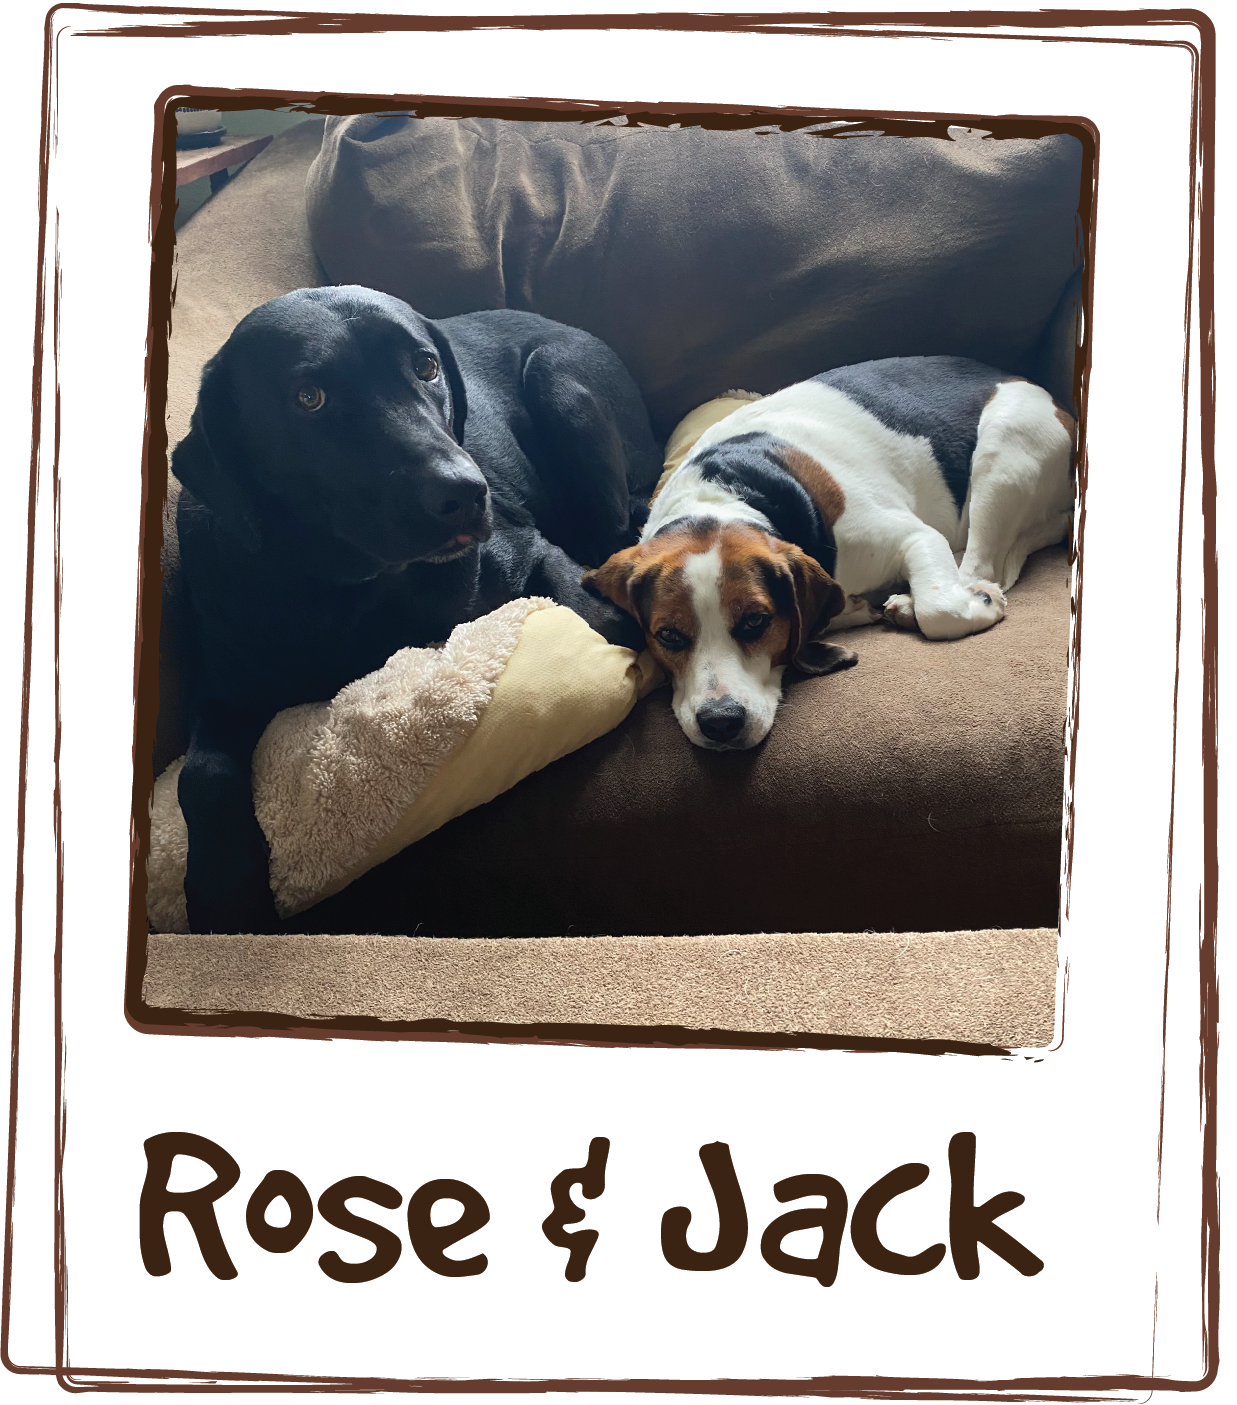  “Our dogs love Licks! And we love the benefits! Our lab - Rose - goes through phases of excessive shedding to the extent that she would have bald spots under her collar. Ever since we started consistently using Licks Skin and Allergy formula, her co